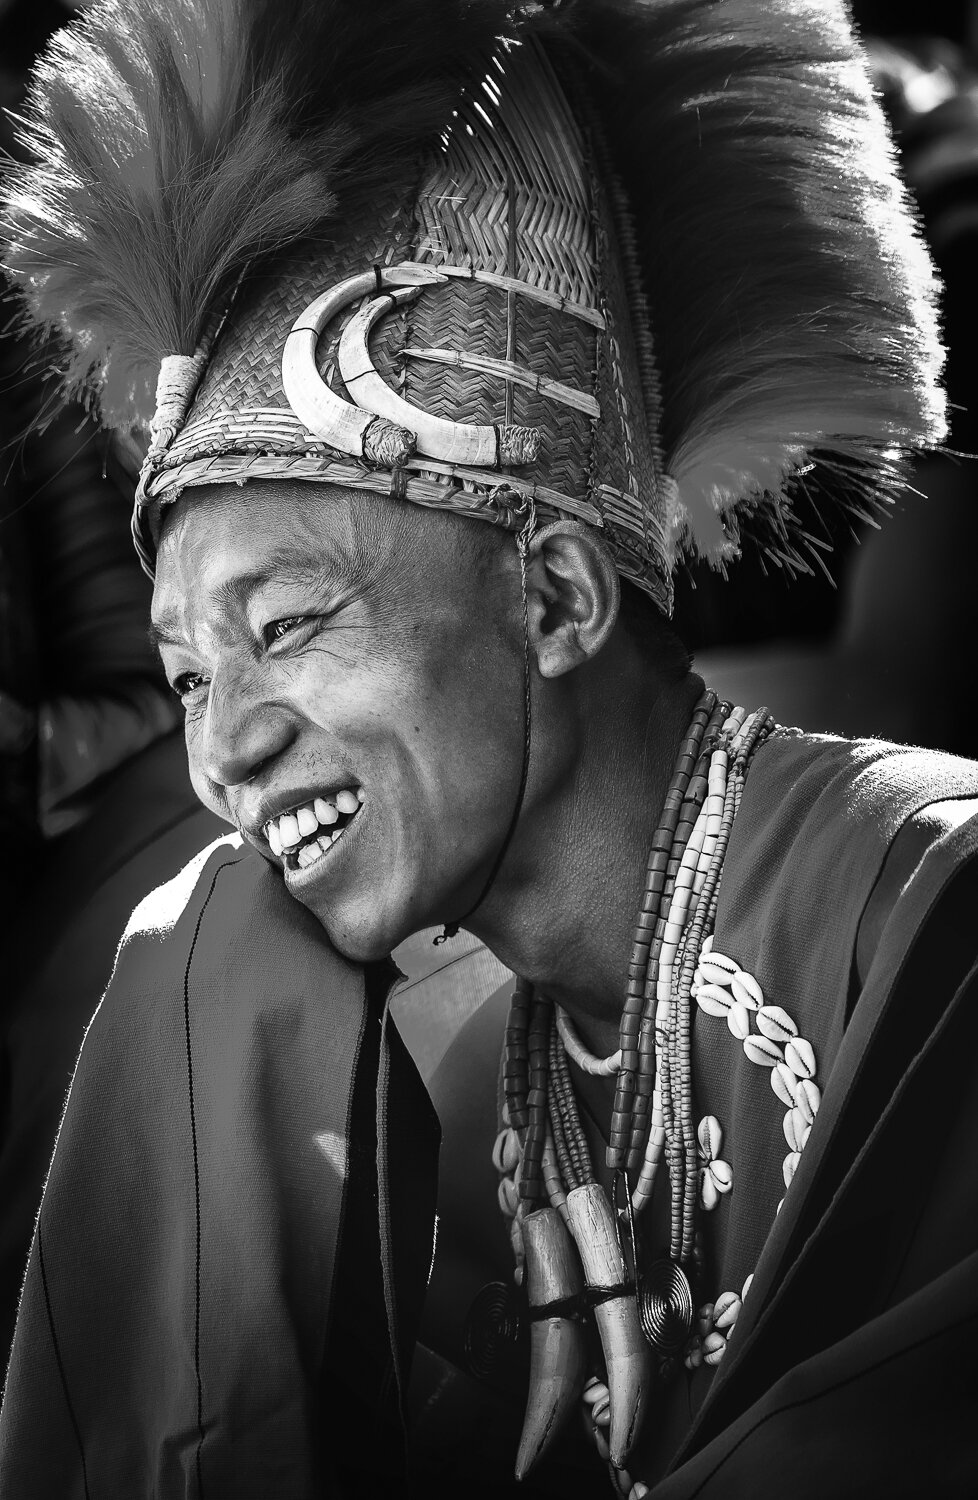 young naga enjoying hornbill festival and laughing in black and white portrait